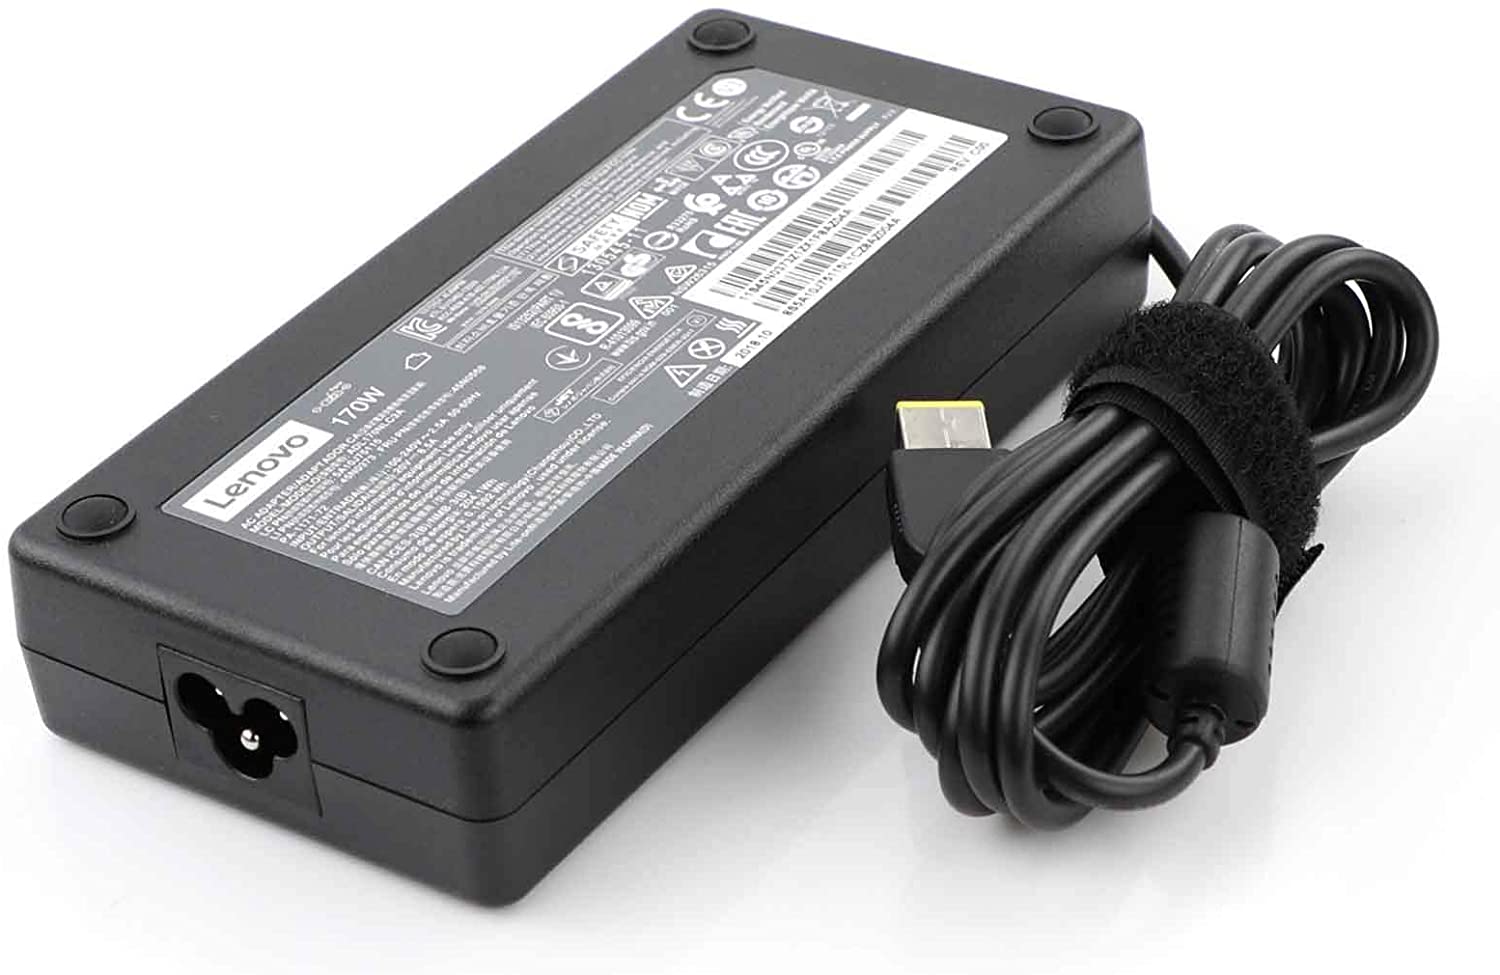 Original 20V 8.5A square tip 170W ADL170NDC3A 5A10J46694 ADP-170CB B Laptop AC Adapter for Lenovo ThinkPad T440p W541 W540 PA-1171-71 Tablet